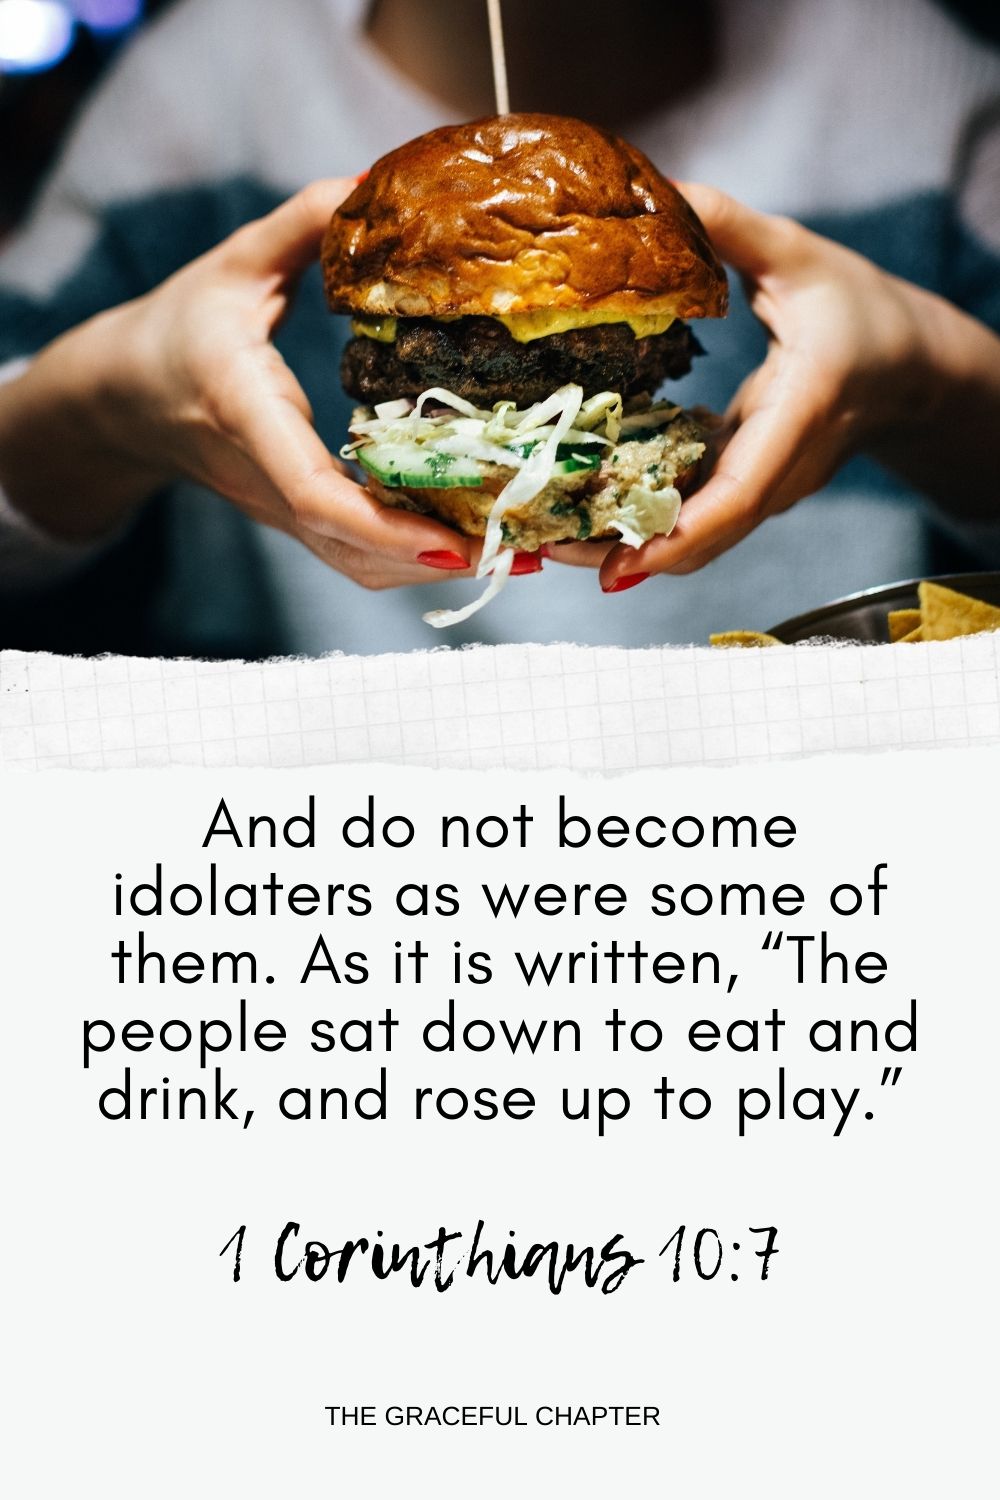 And do not become idolaters as were some of them. As it is written, “The people sat down to eat and drink, and rose up to play.” 1 Corinthians 10:7